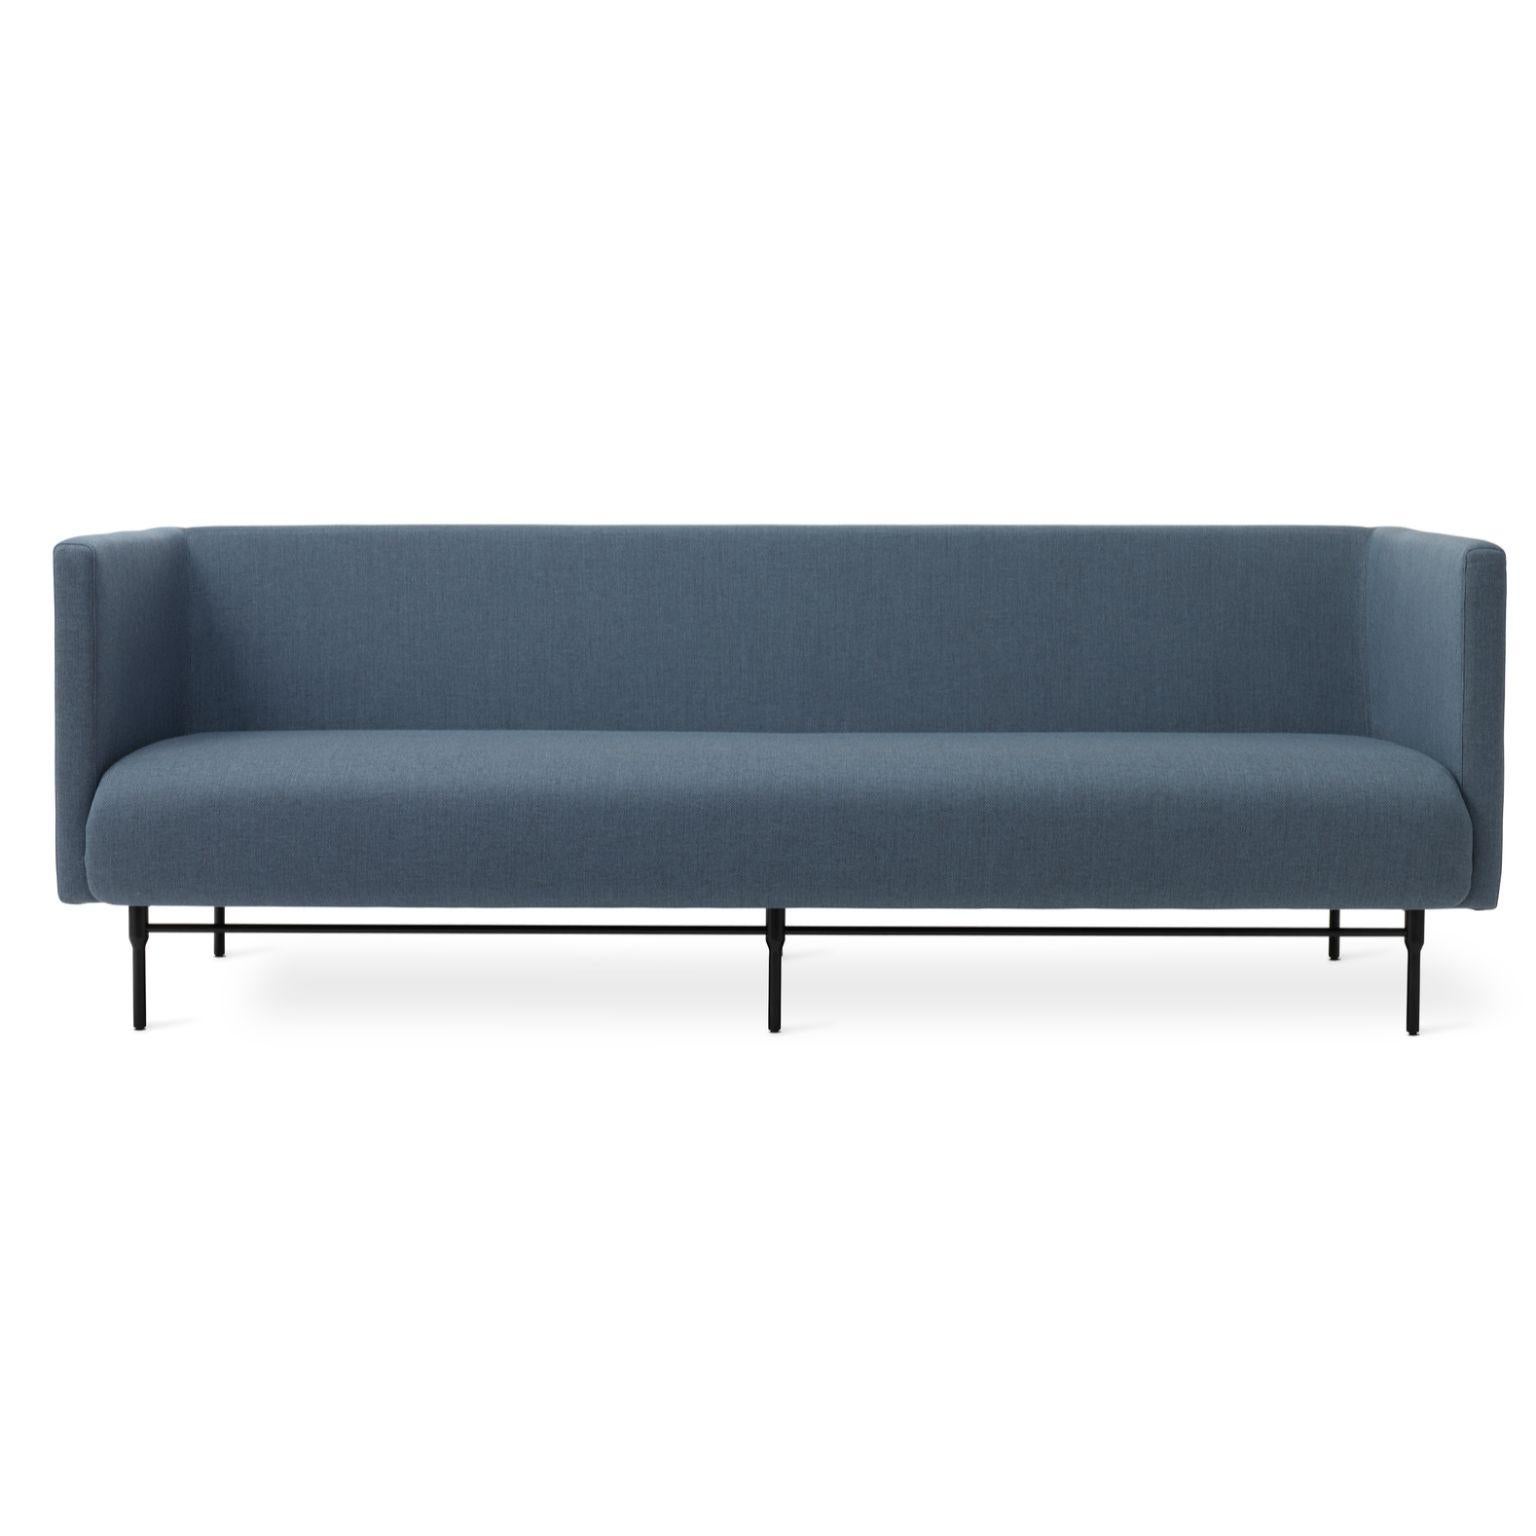 Galore 3 Seater Light Steel Blue by Warm Nordic
Dimensions: D222 x W83 x H 76 cm
Material: Textile upholstery, Powder coated black steel legs, Wooden frame, foam, spring system.
Weight: 62 kg
Also available in different colours and finishes. Please